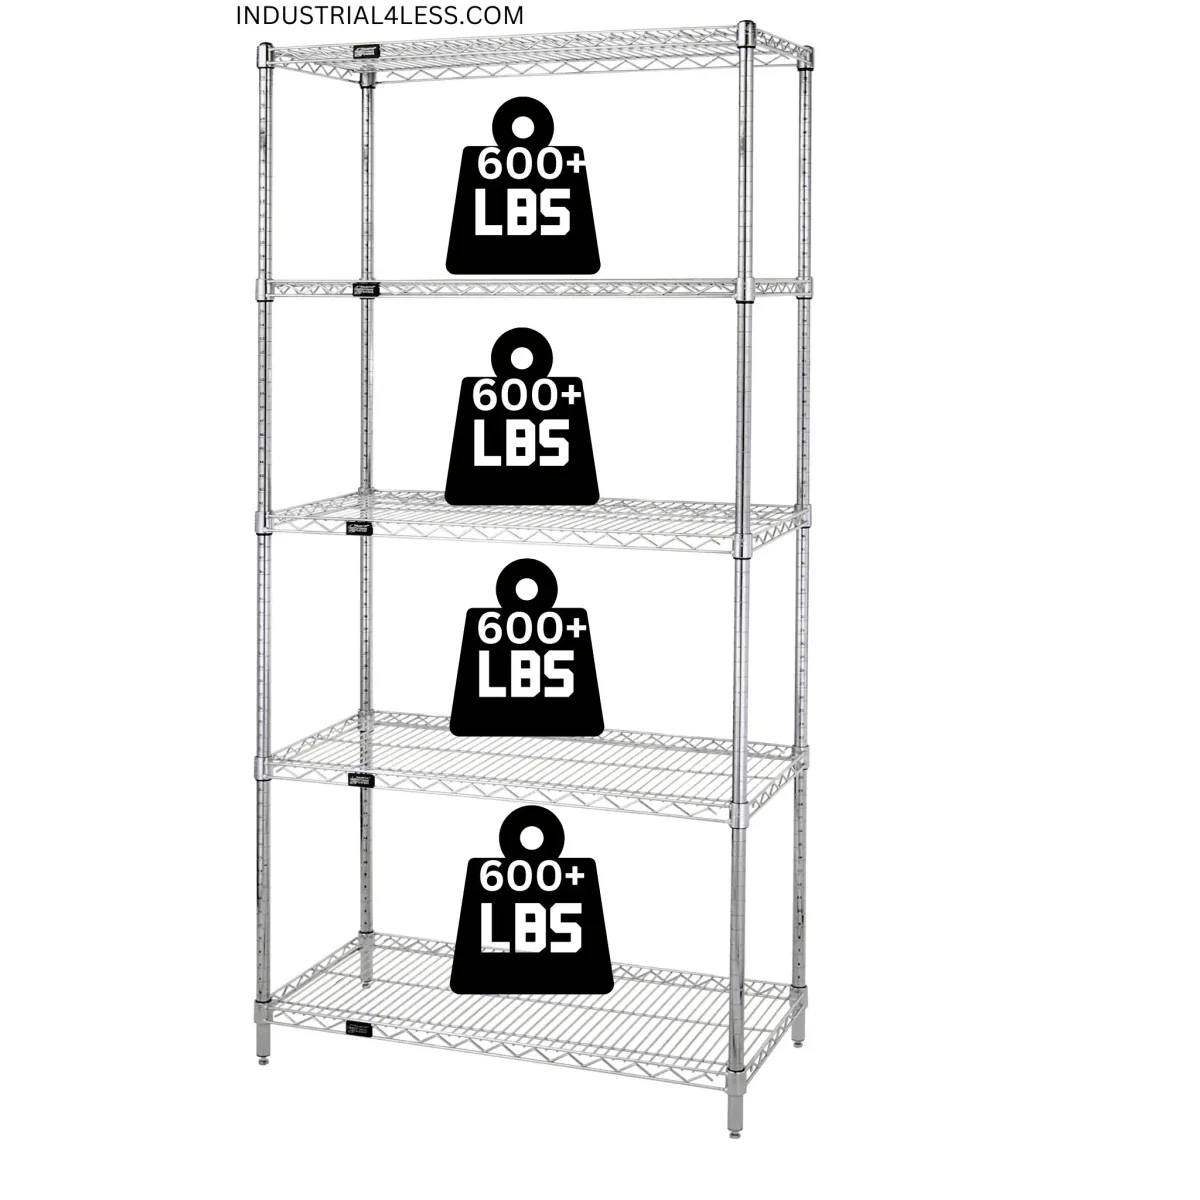 30" x 60" Stainless Steel Wire Shelving Unit - Industrial 4 Less - 30605S-5